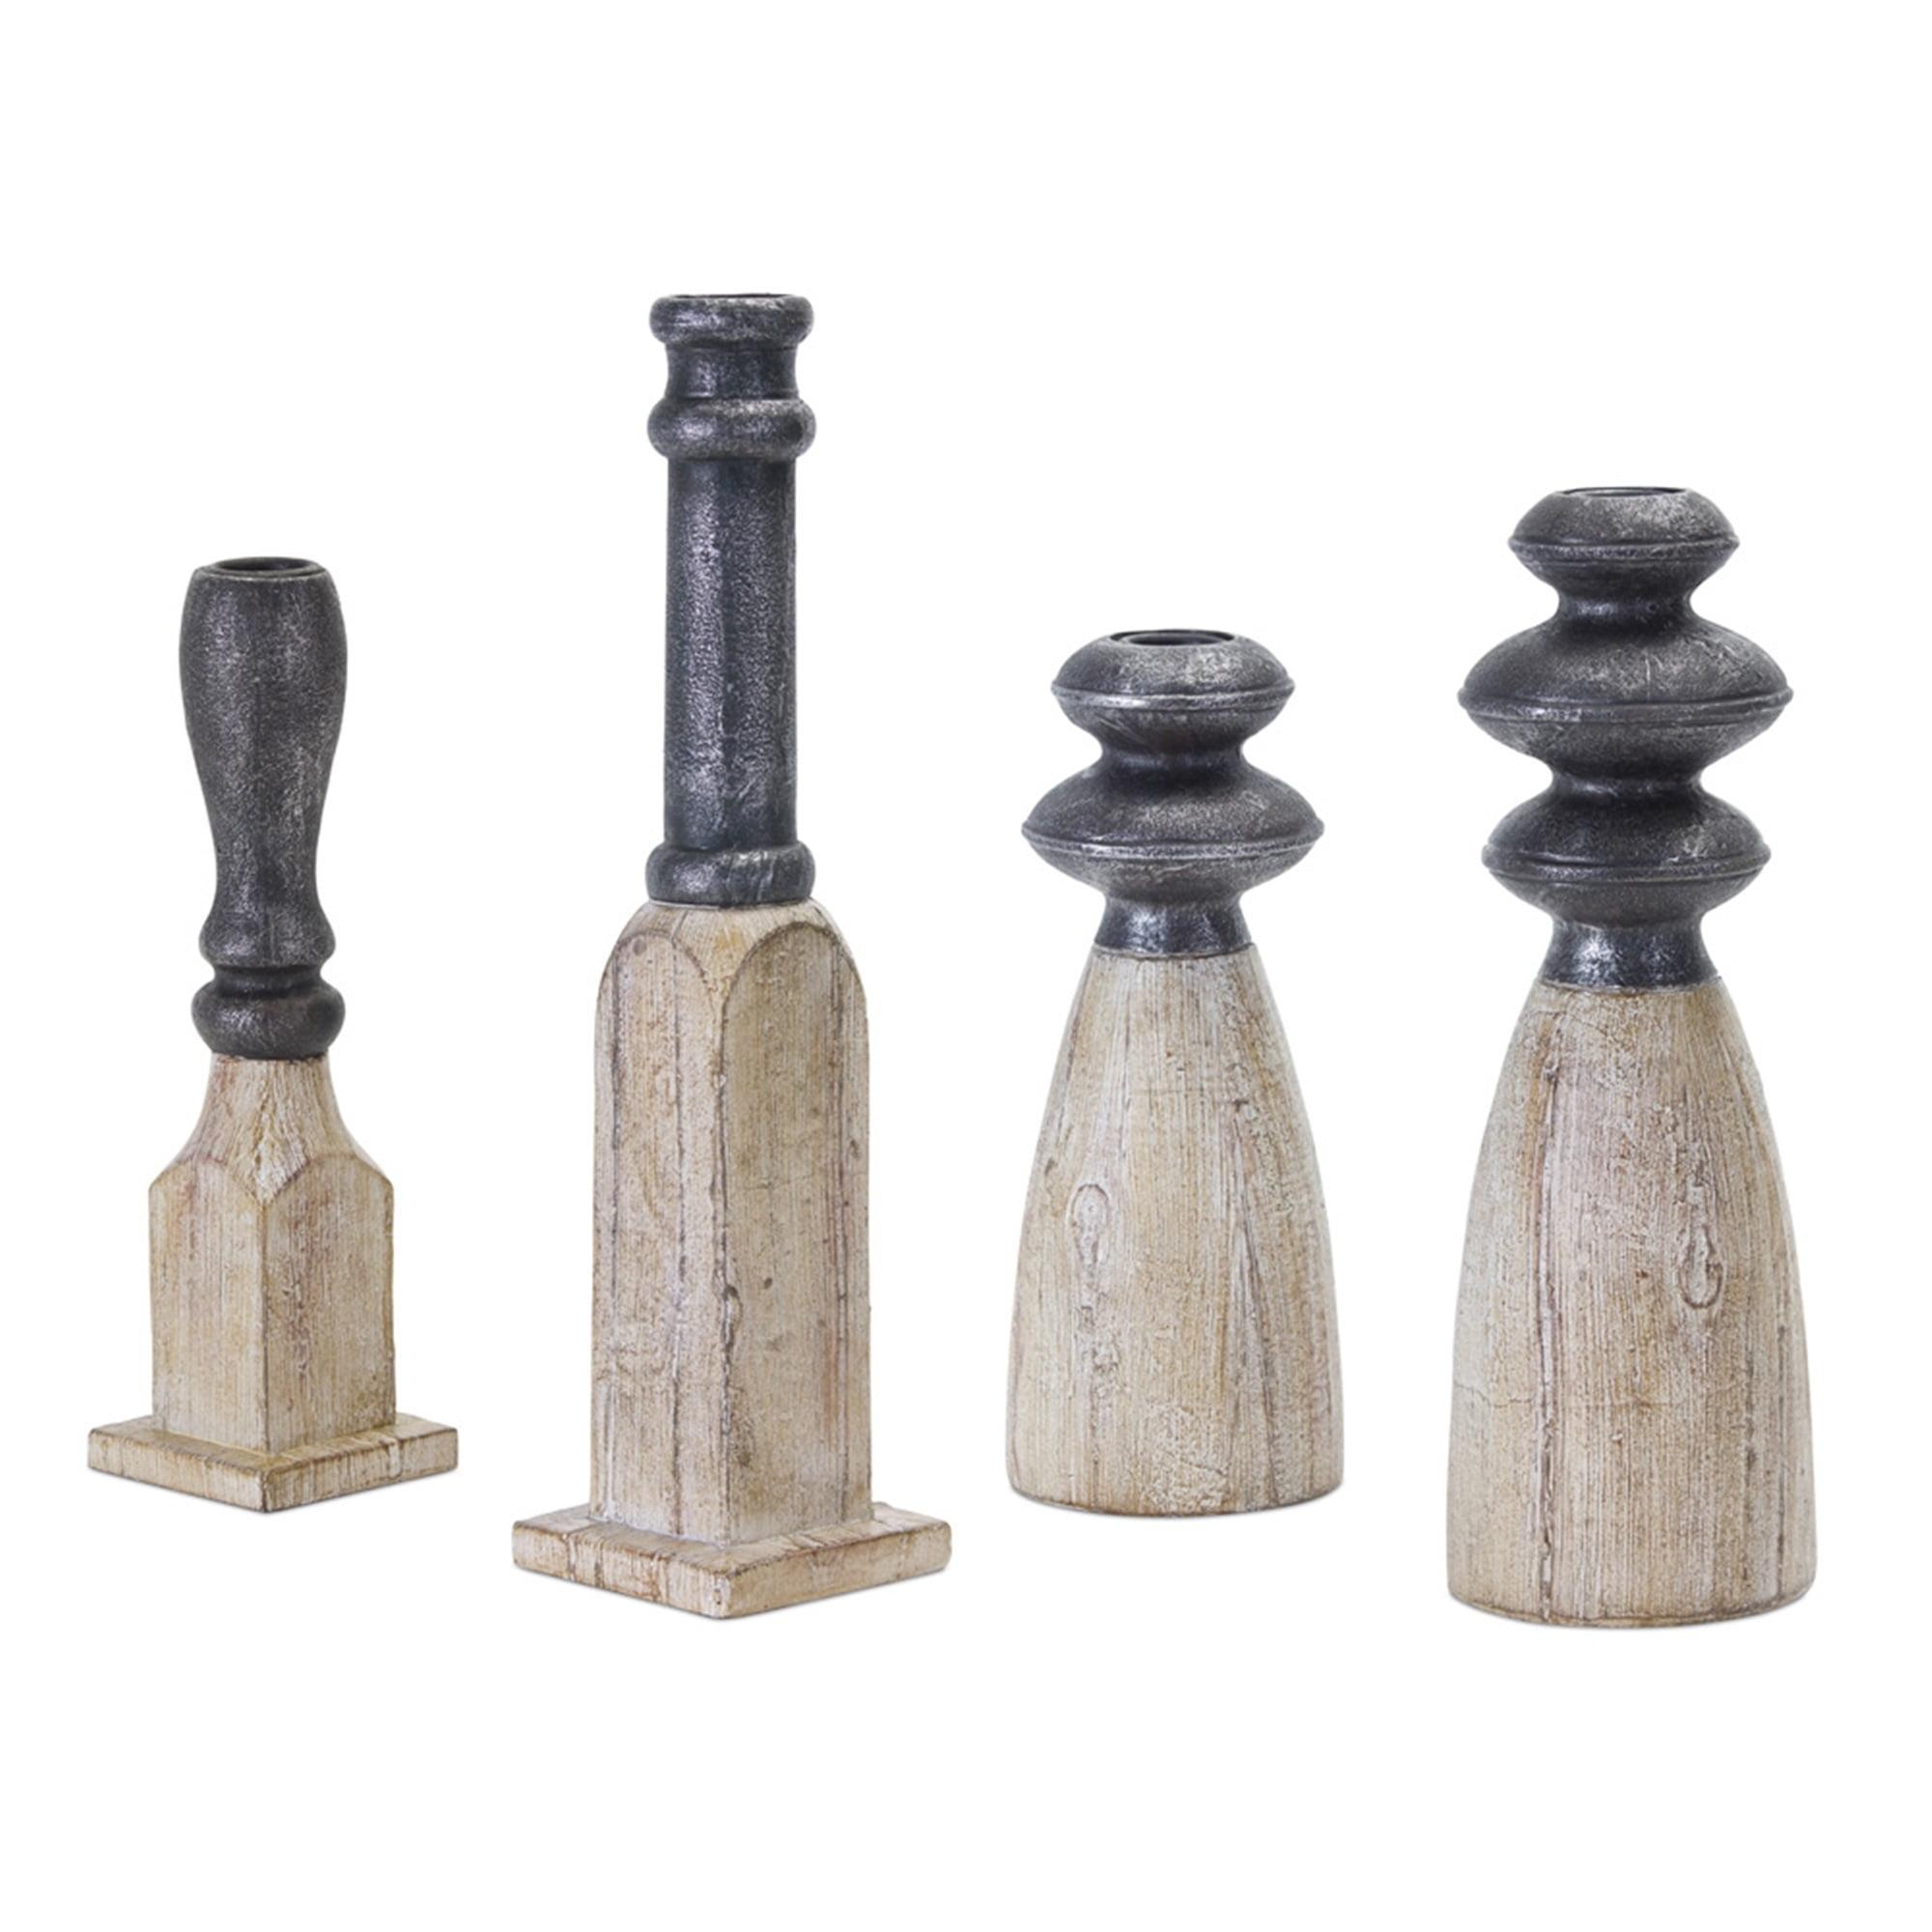 Rustic Charm Black and Brown Resin Pillar Candle Holders, Set of 4